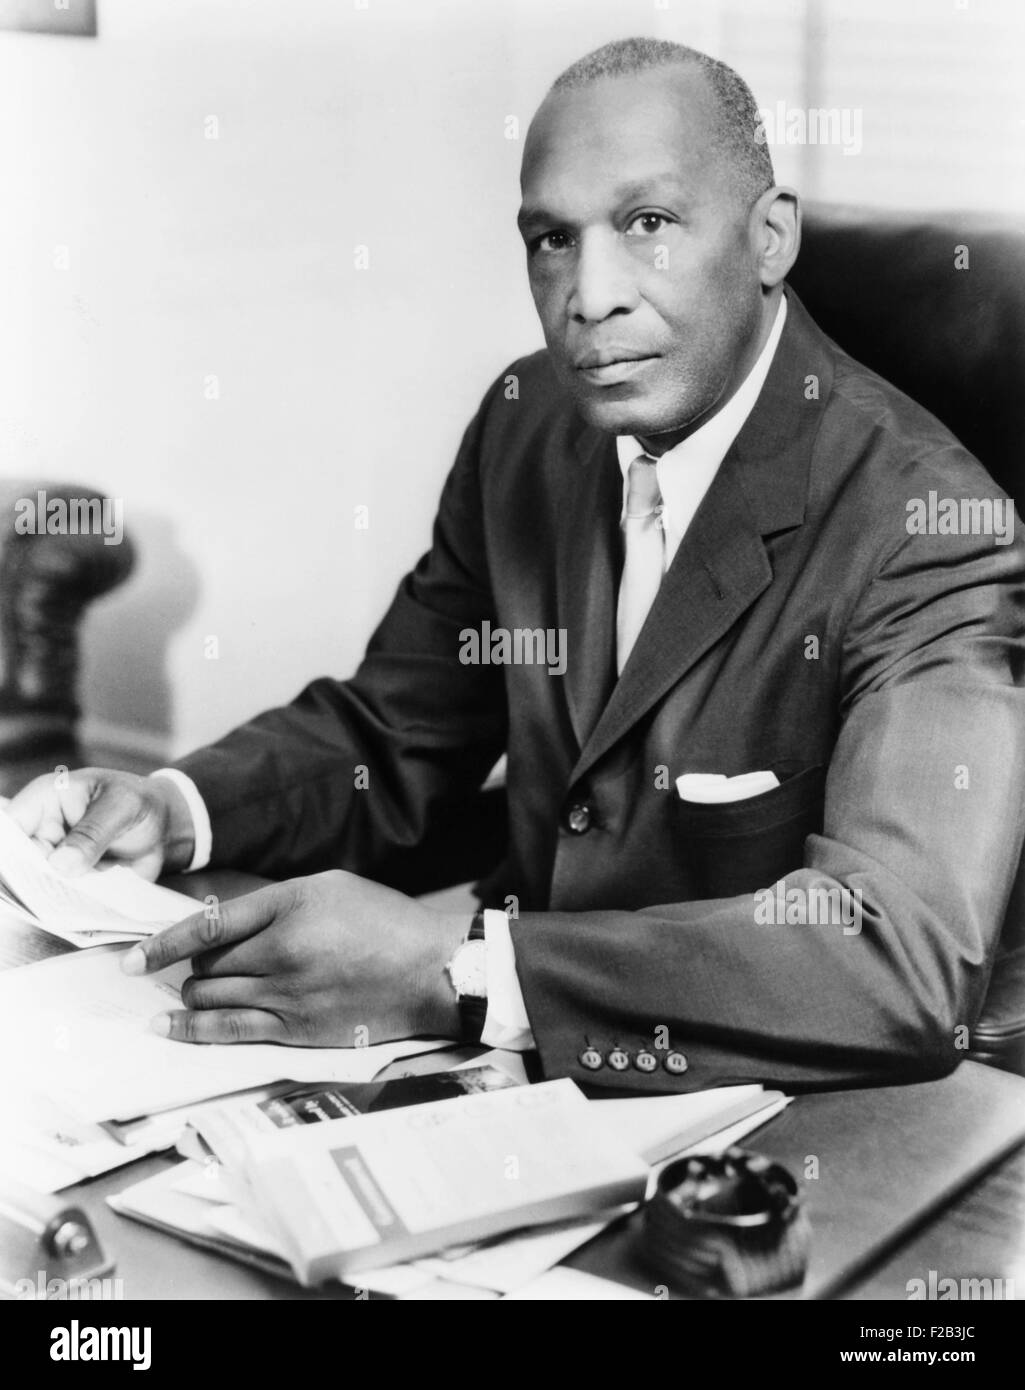 Robert N. C. Nix was the first African American to represent Pennsylvania in Congress. He served 8 terms, from 1963 to 1979, from Pennsylvania's 4th district, in the south-central part of the state. Ca. 1969. - (CSU 2015 6 185) Stock Photo